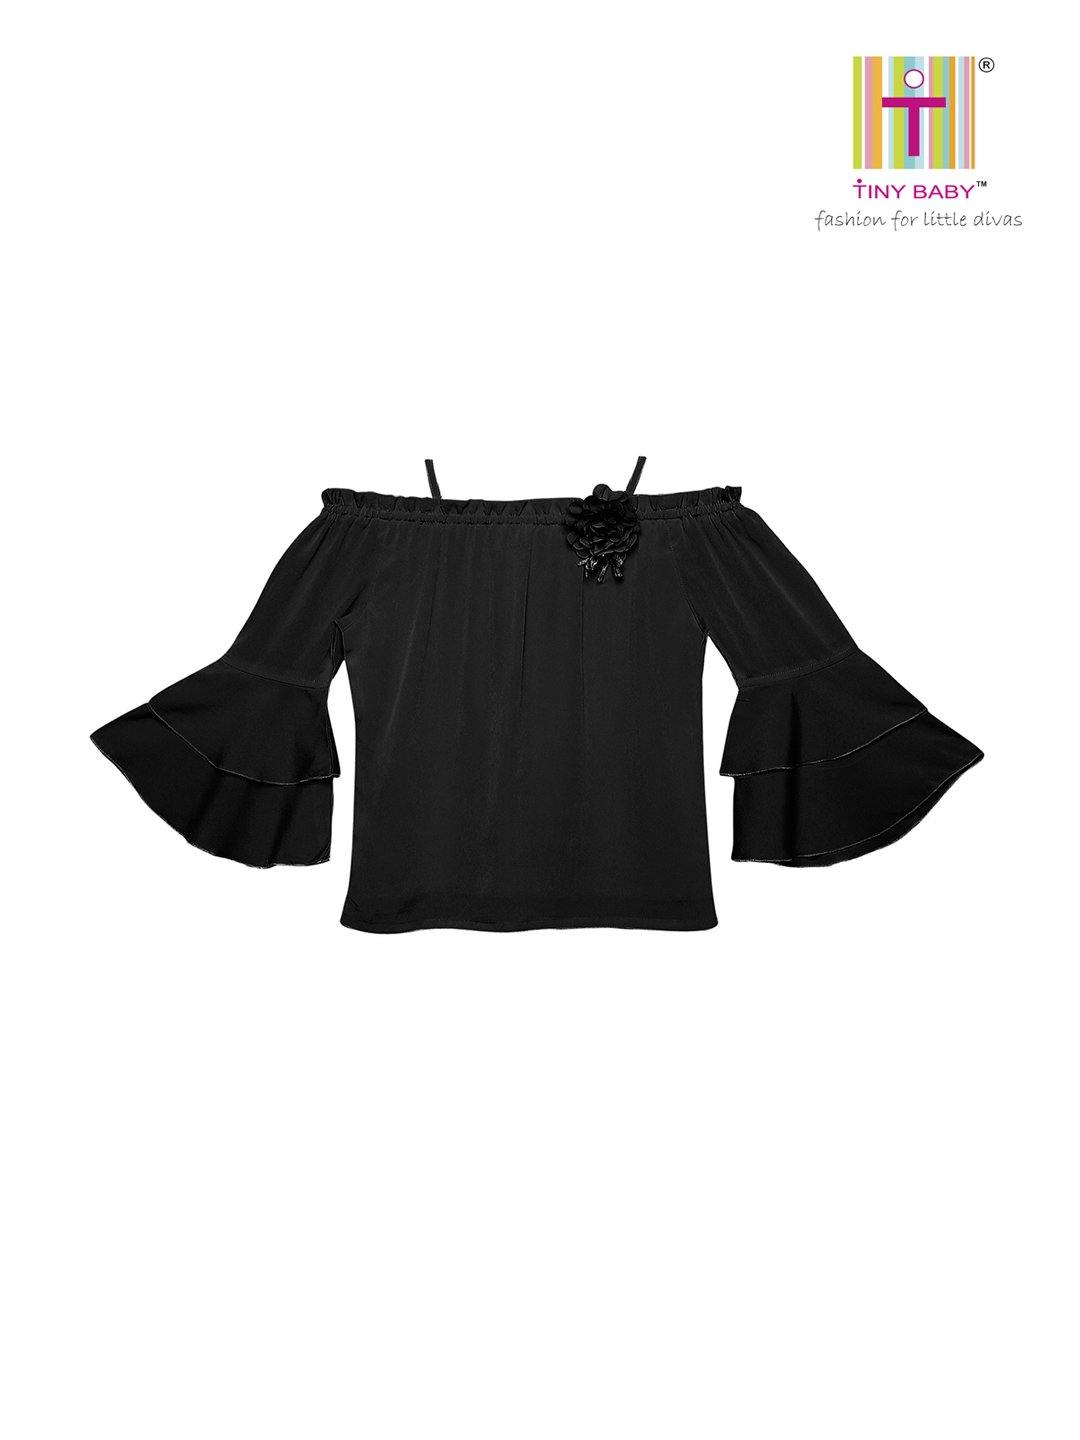 Tiny Baby Black Colored Top-T-101-Black - TINY BABY INDIA shop.tinybaby.in